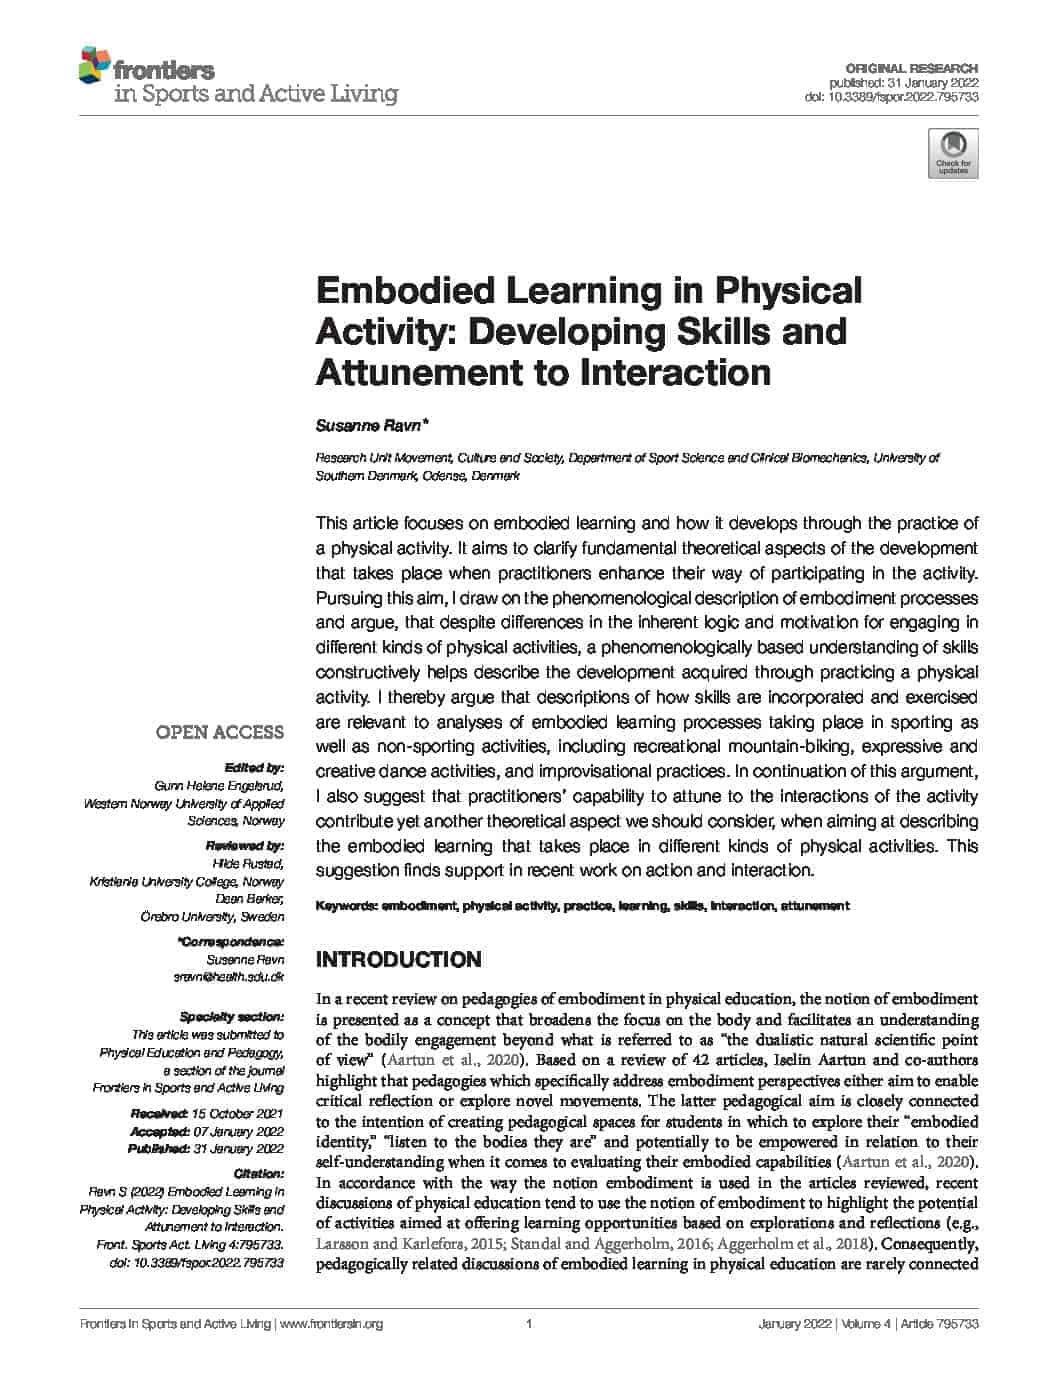 Featured image for “Embodied Learning in Physical Activity: Developing Skills and Attunement to Interaction”